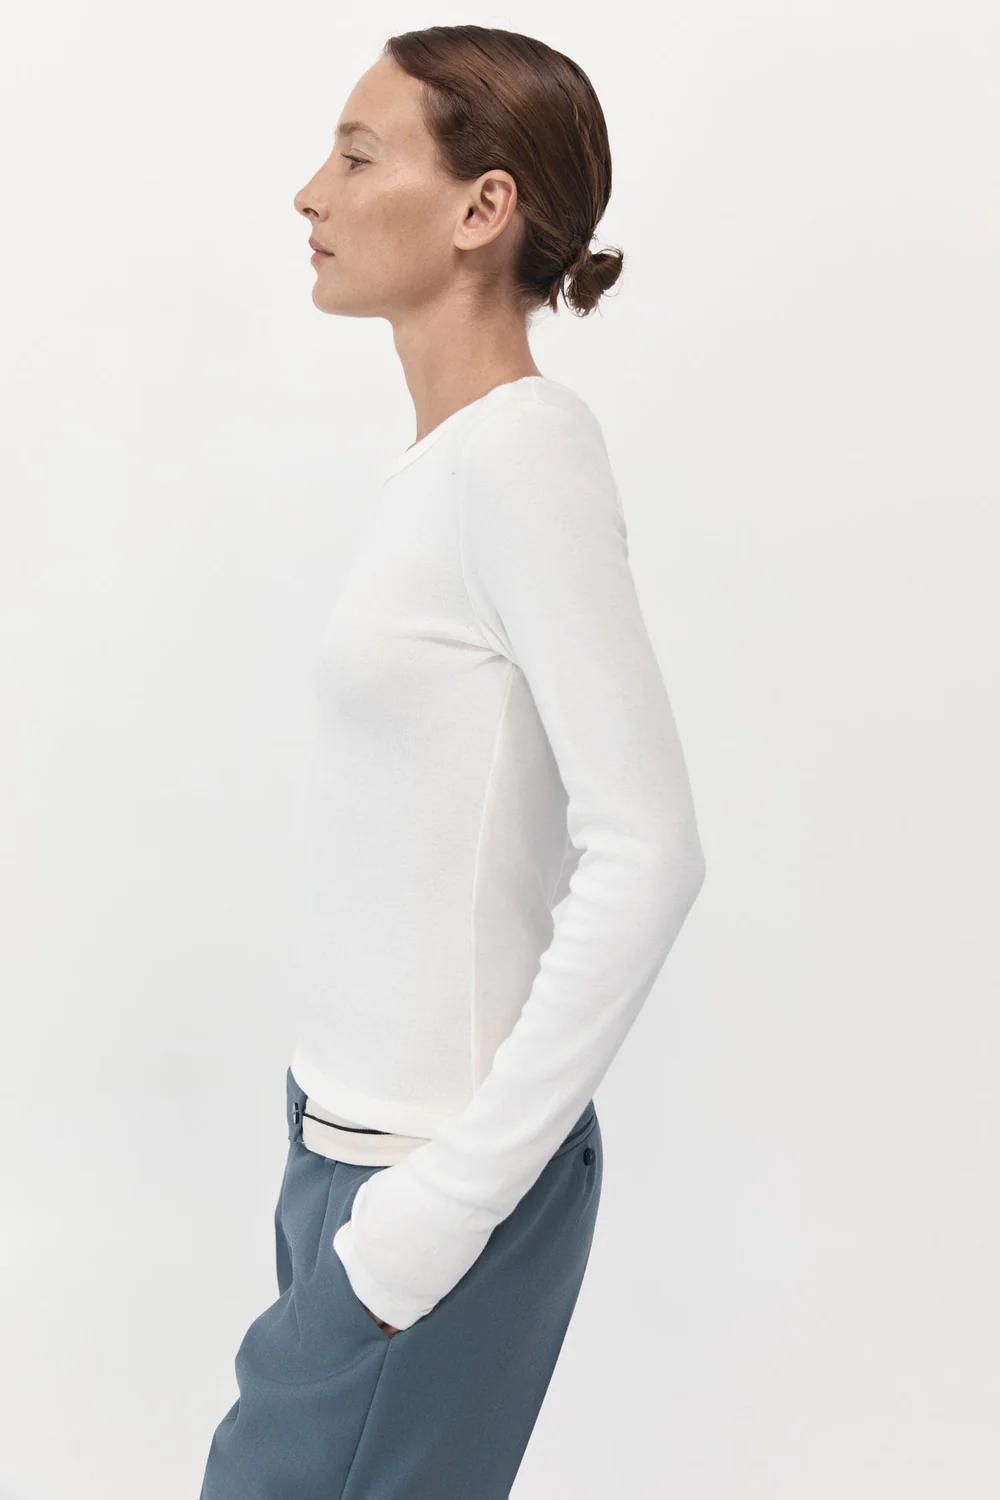 Product Image for Organic Cotton Long Sleeve Top, White